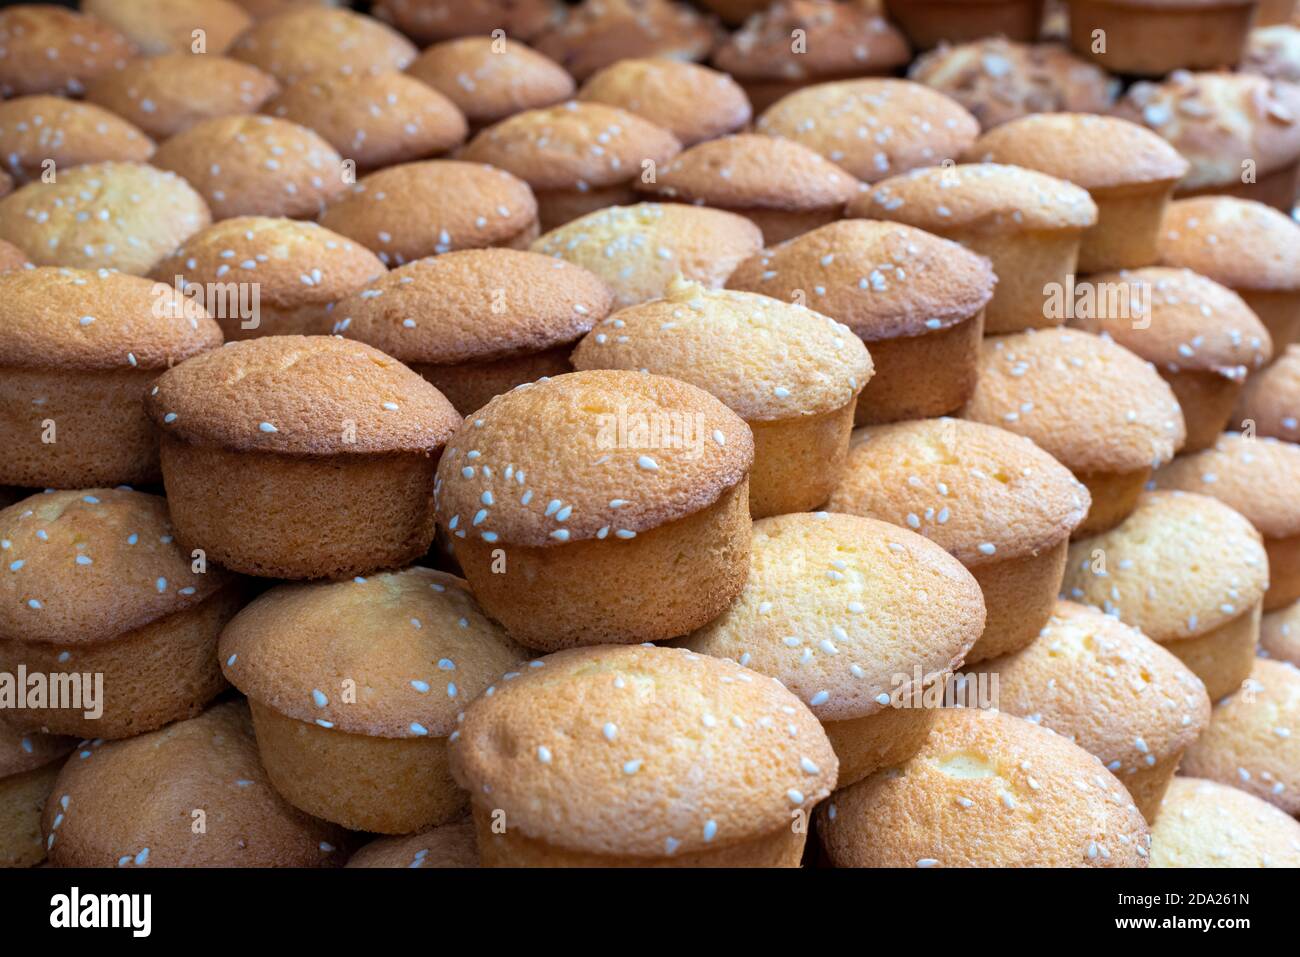 Chinese cakes heap in a street market in chengdu, Sichuan province, China Stock Photo